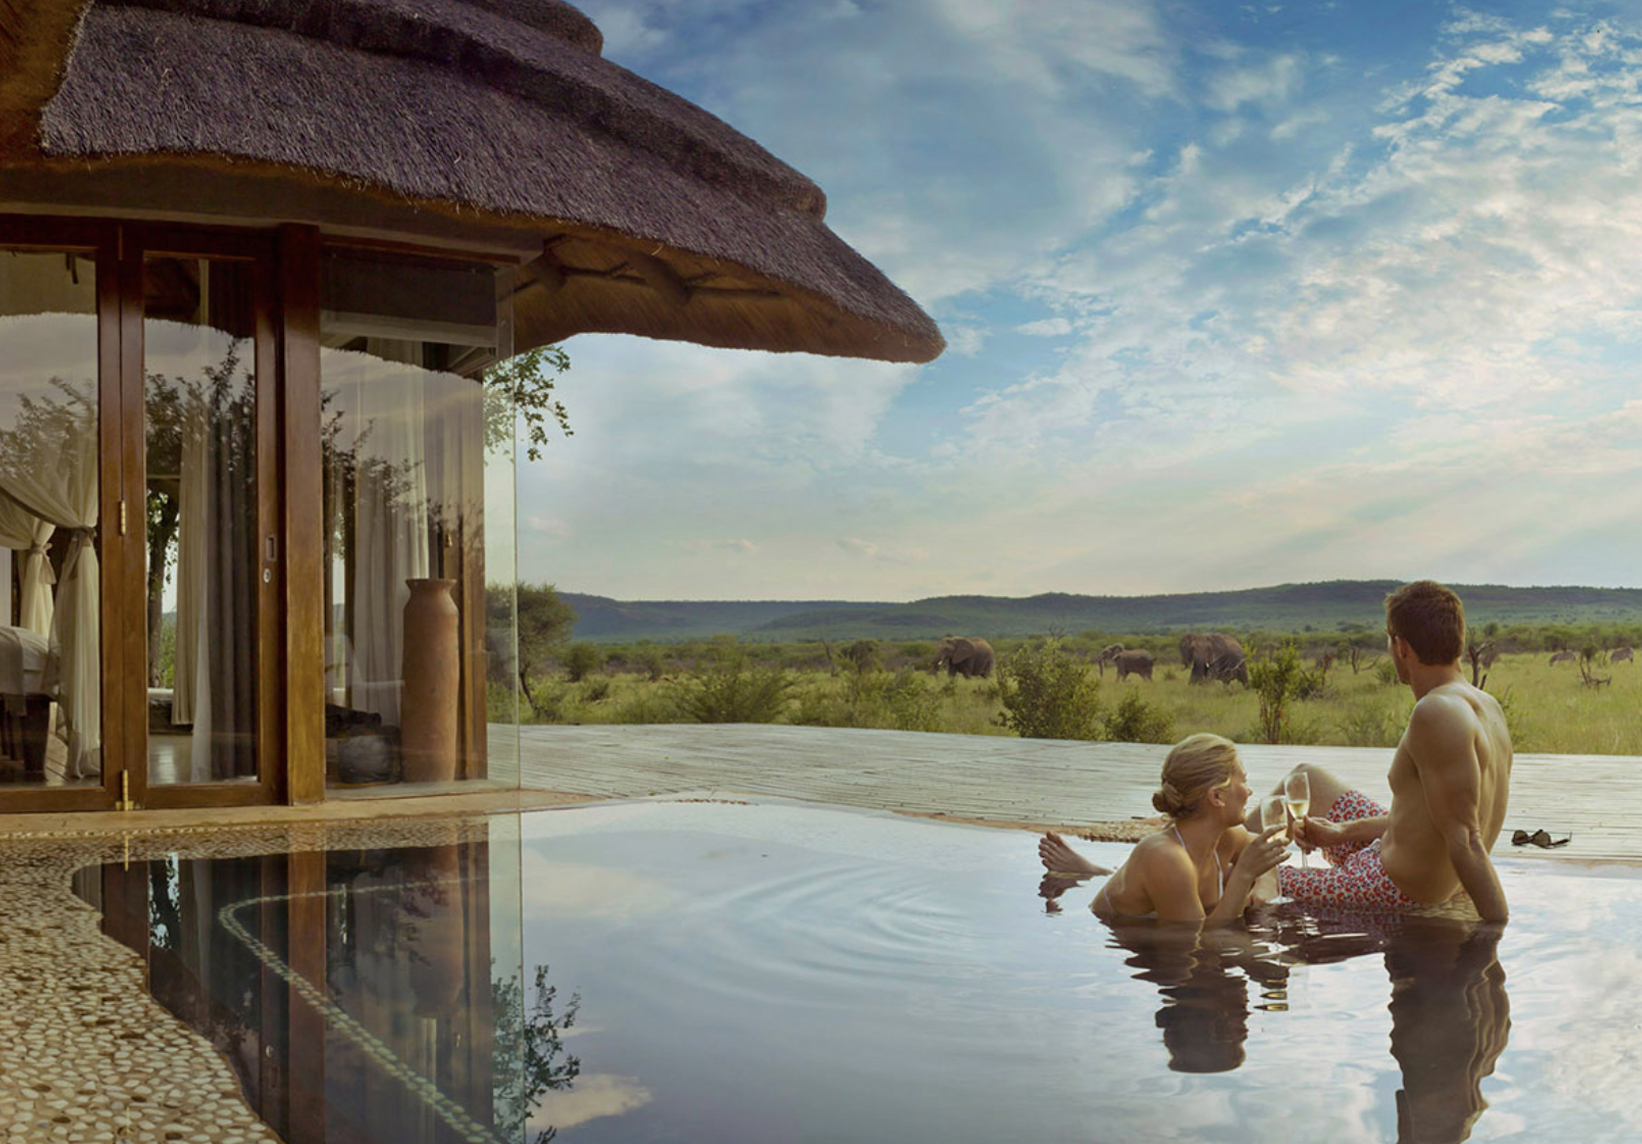 Experience a South Africa Bush Retreat, Donated by Vance Kershner and Chrissy Hitchens